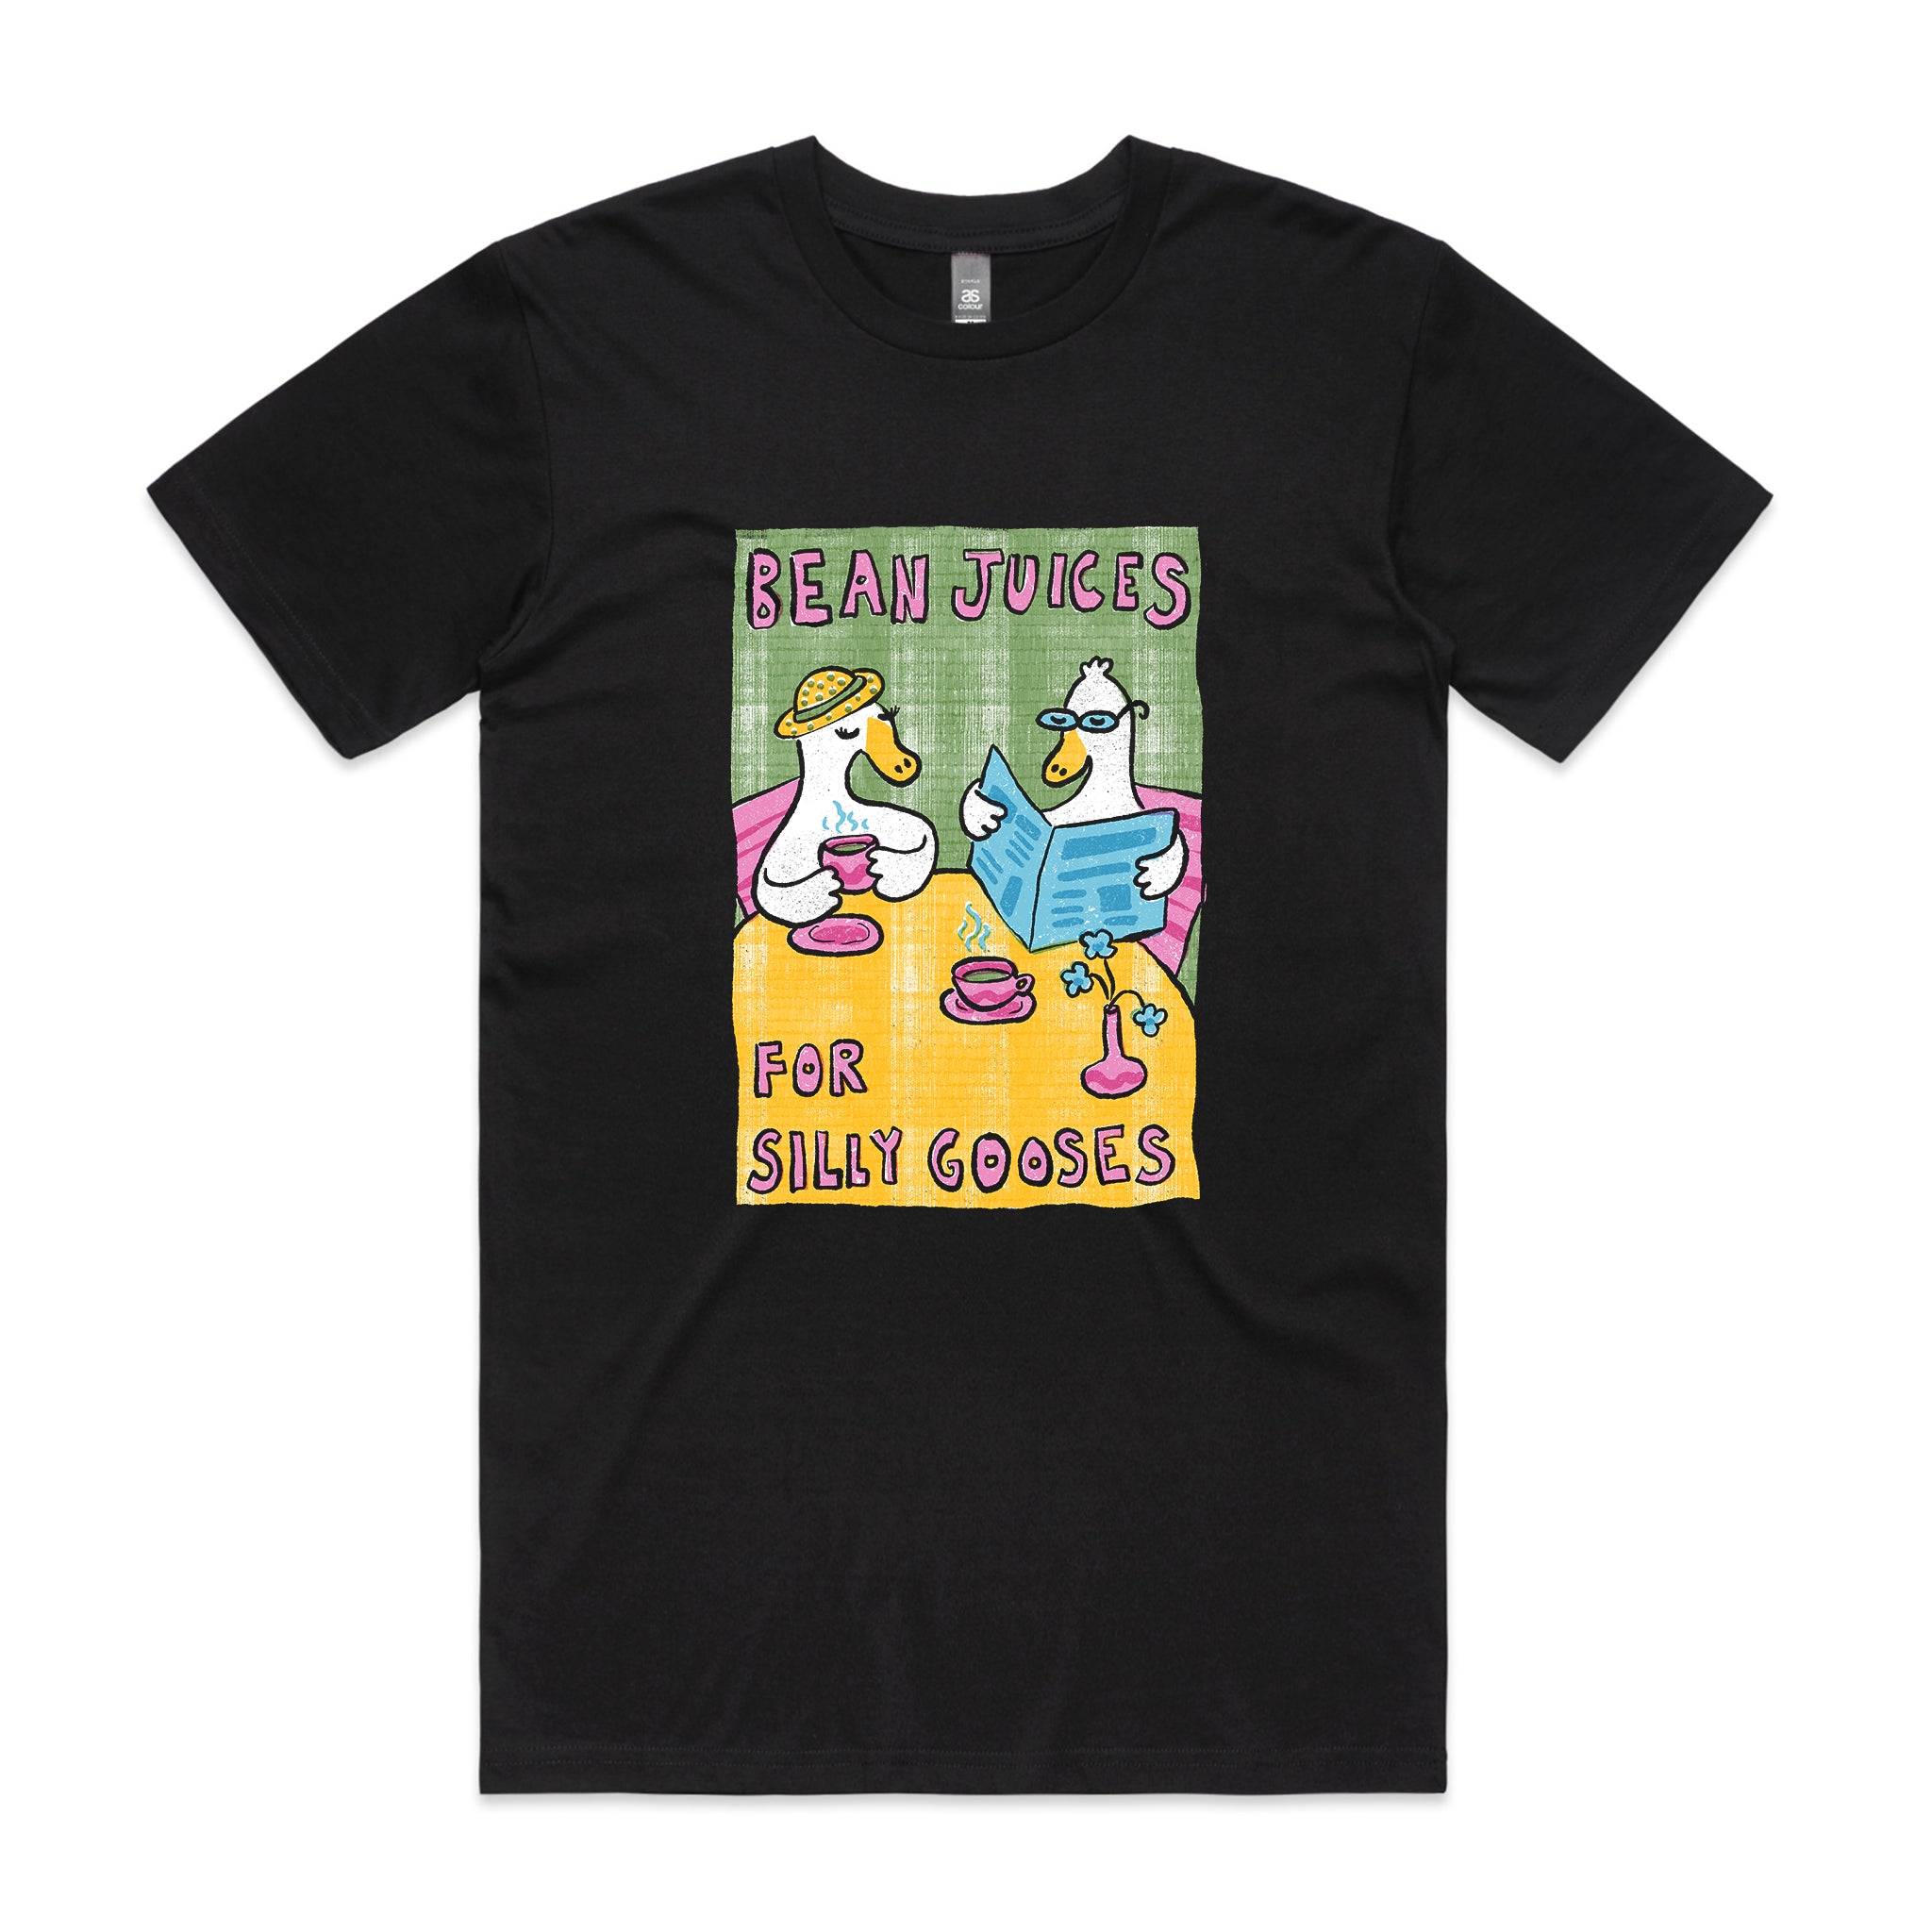 Bean Juices For Silly Gooses Tee